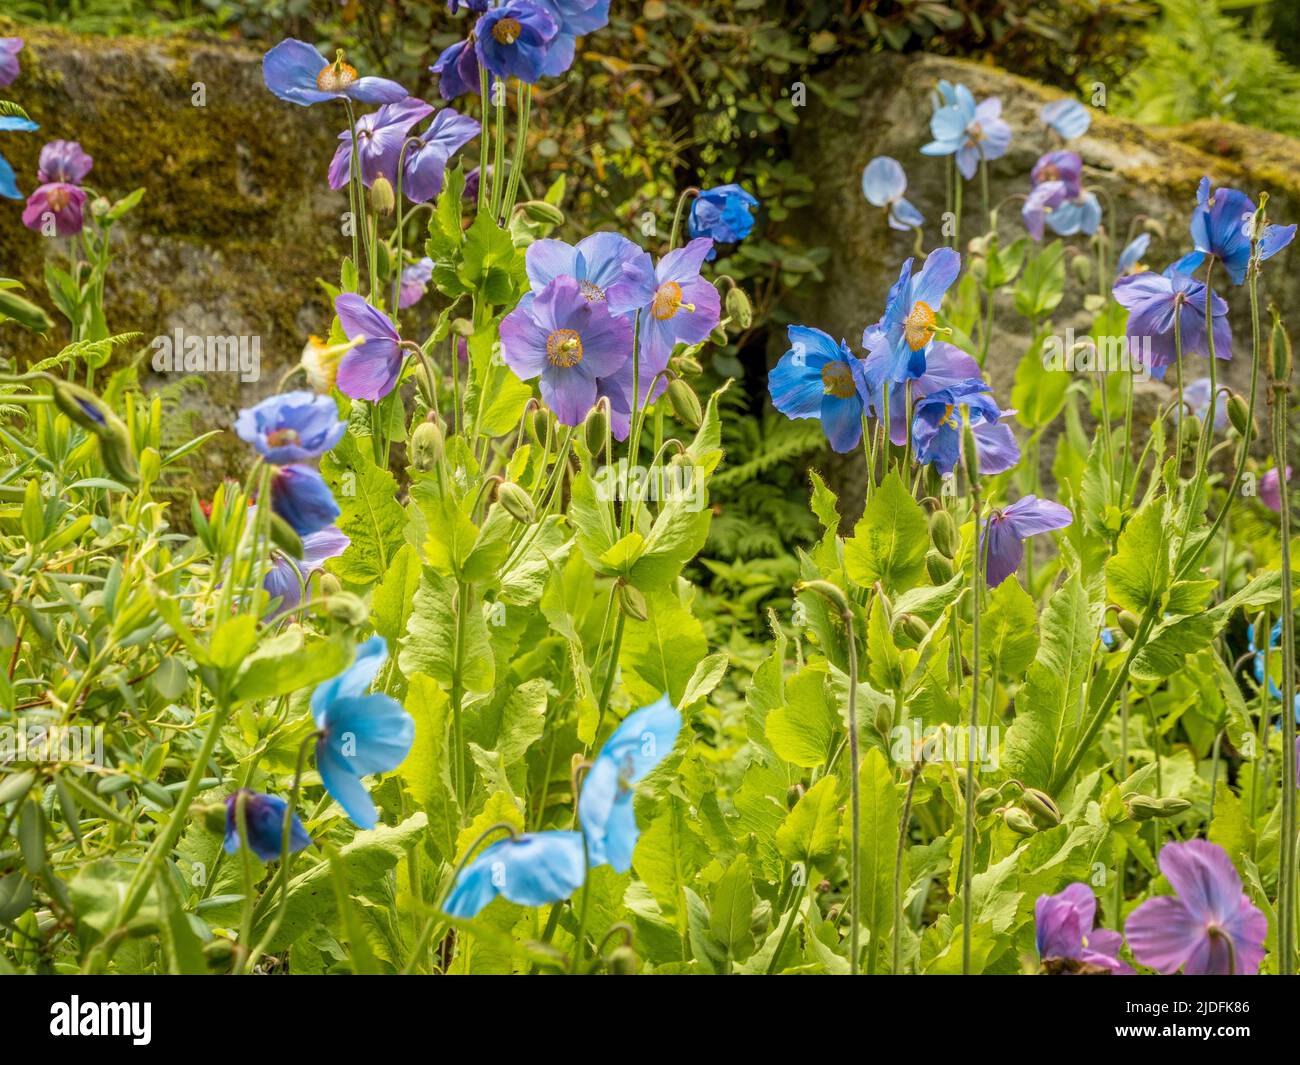 Meconopsis betonicifolia commonly know as Himalayan blue poppies growing in a UK garden. Stock Photo